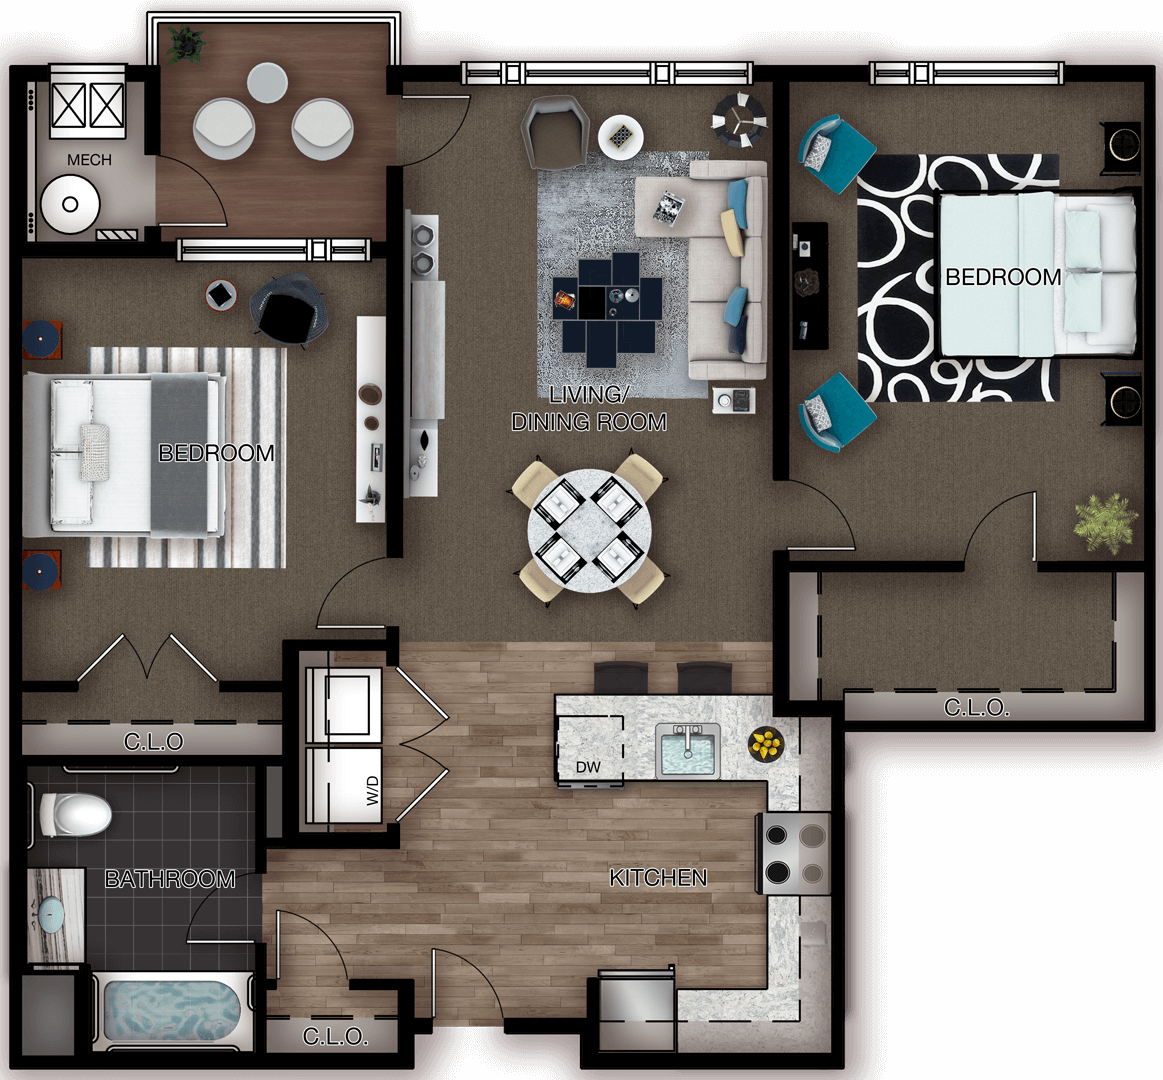 Apartment floor plan showing two bedrooms and one bathroom with separate office area in North Jersey